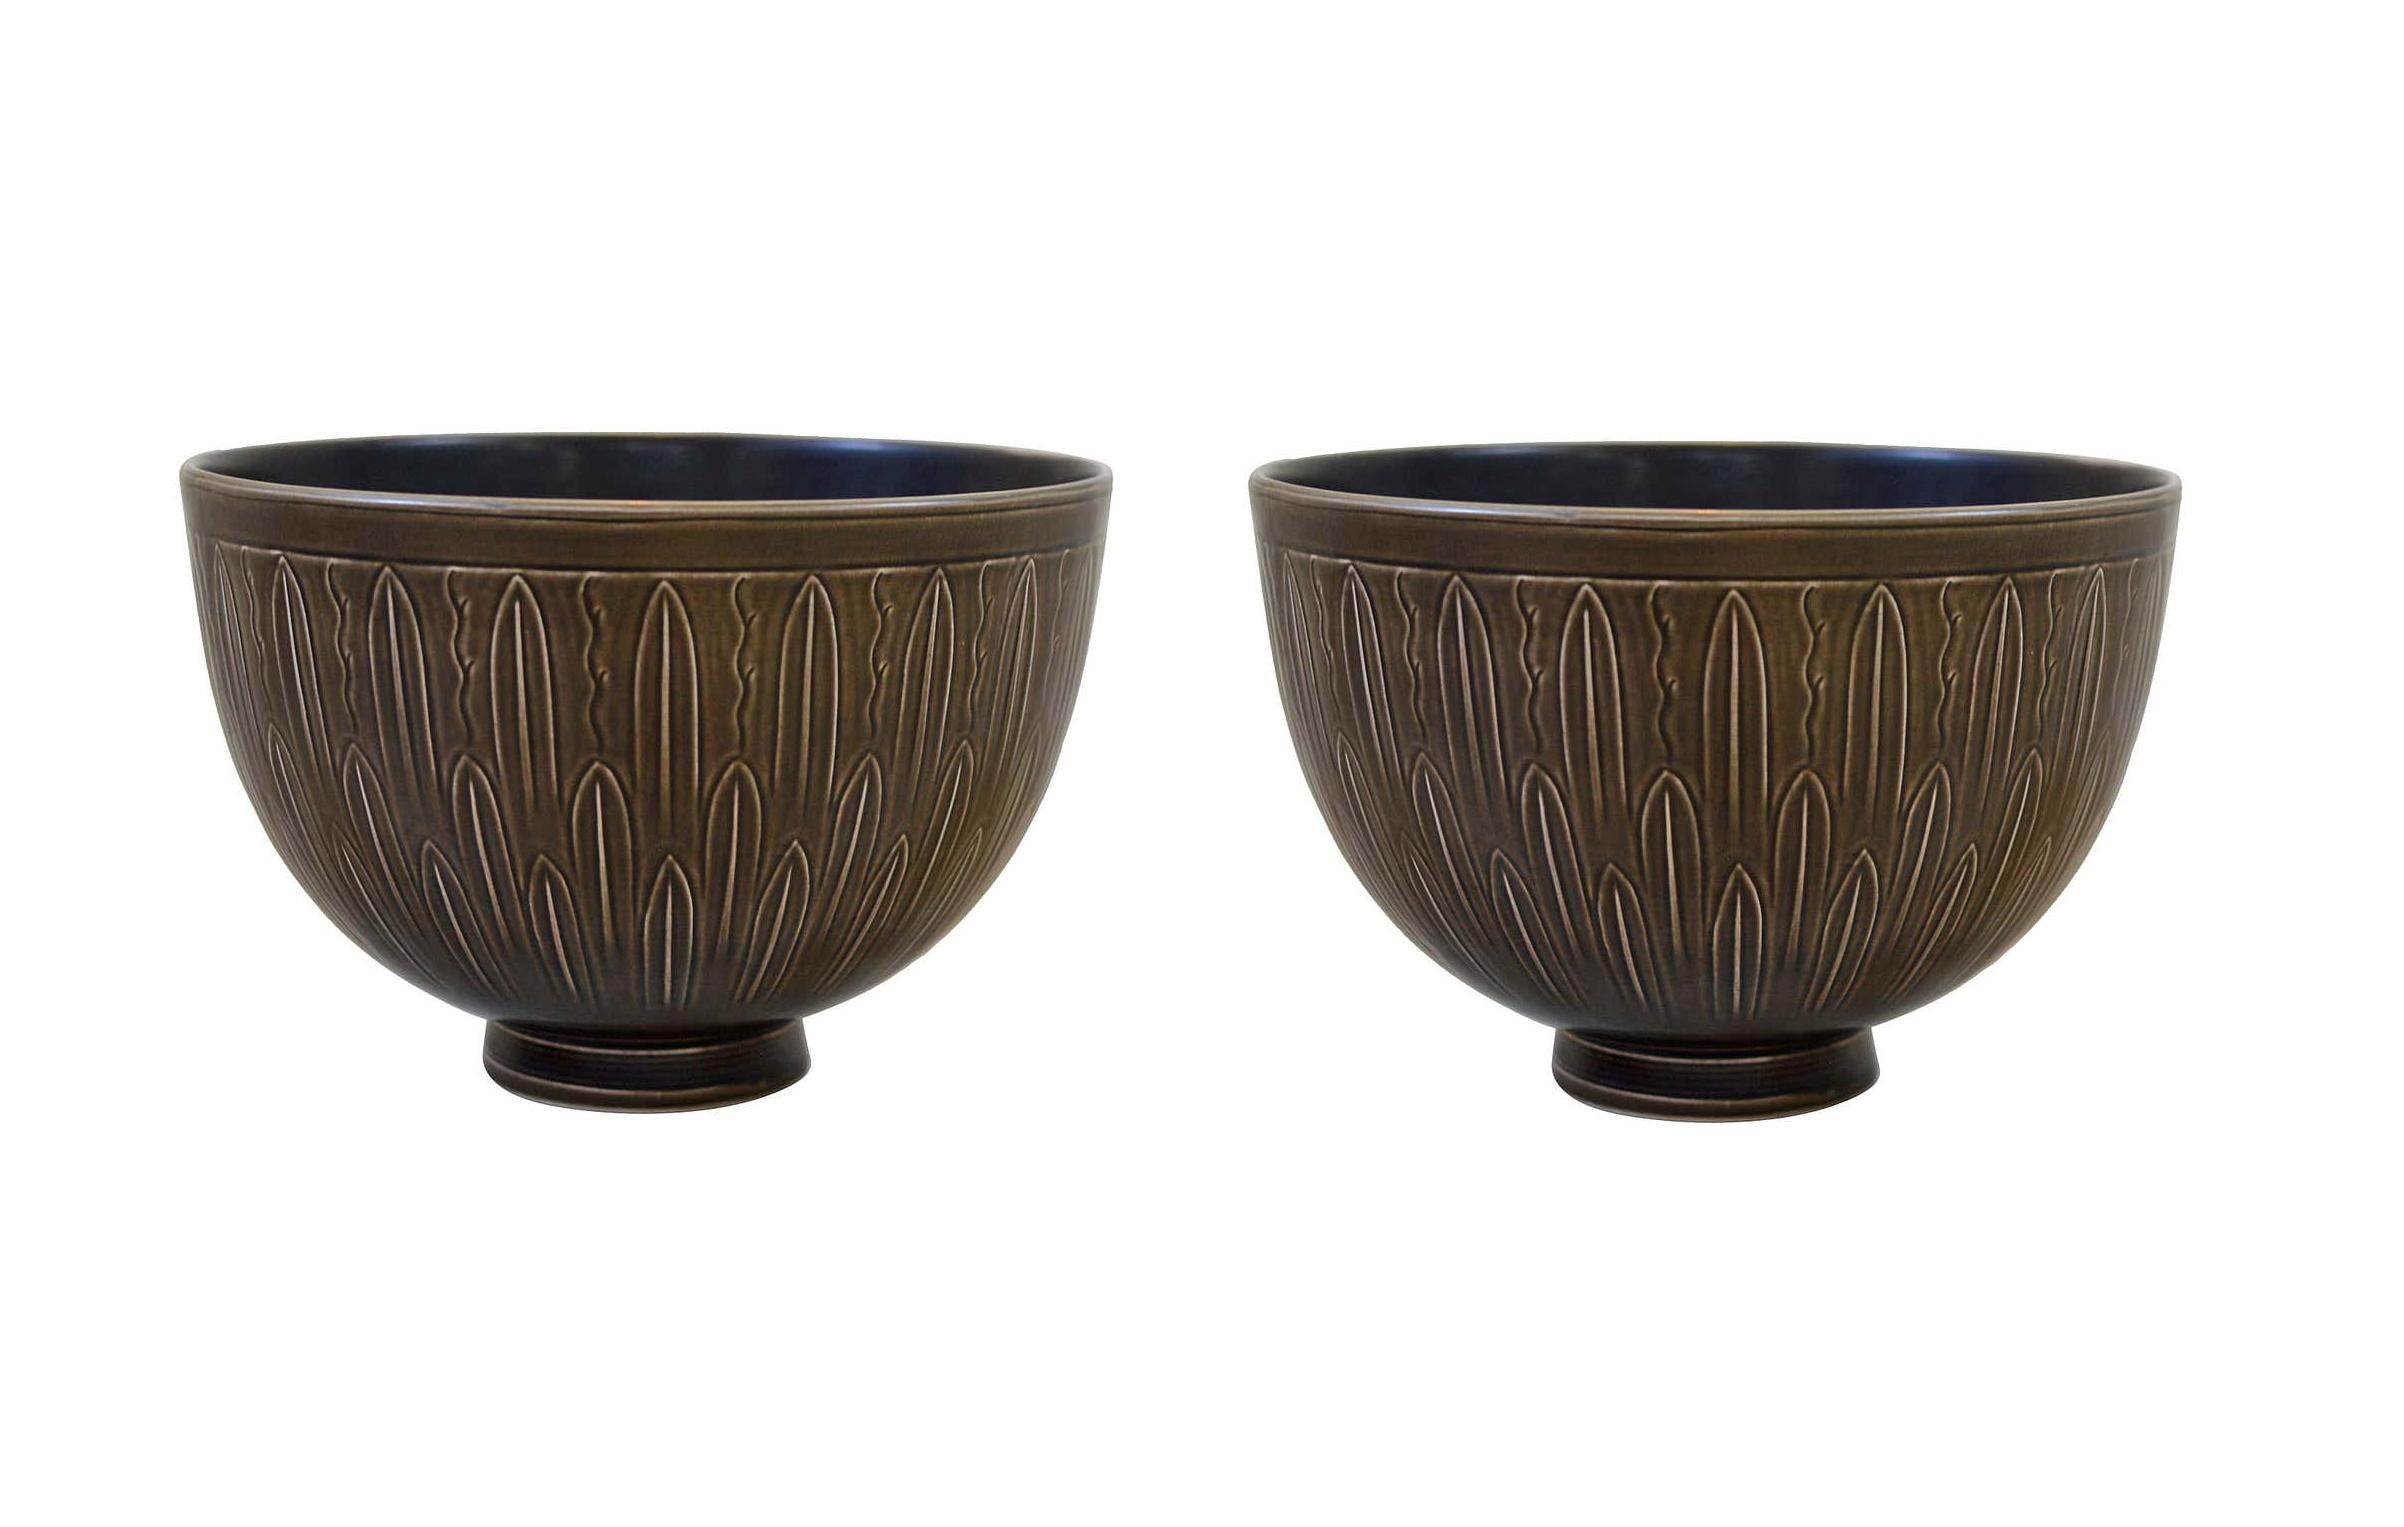 Two large and rare bowls from the ‘Solbjerg’ series, from Nils Johan Thorvald Thorsson (1898–1975) earlier work for Aluminia and marked. Measures: Ø 28.5 x H 19.5 cm.

Nils Johan Thorvald Thorsson is regarded as one of the best designers of Royal